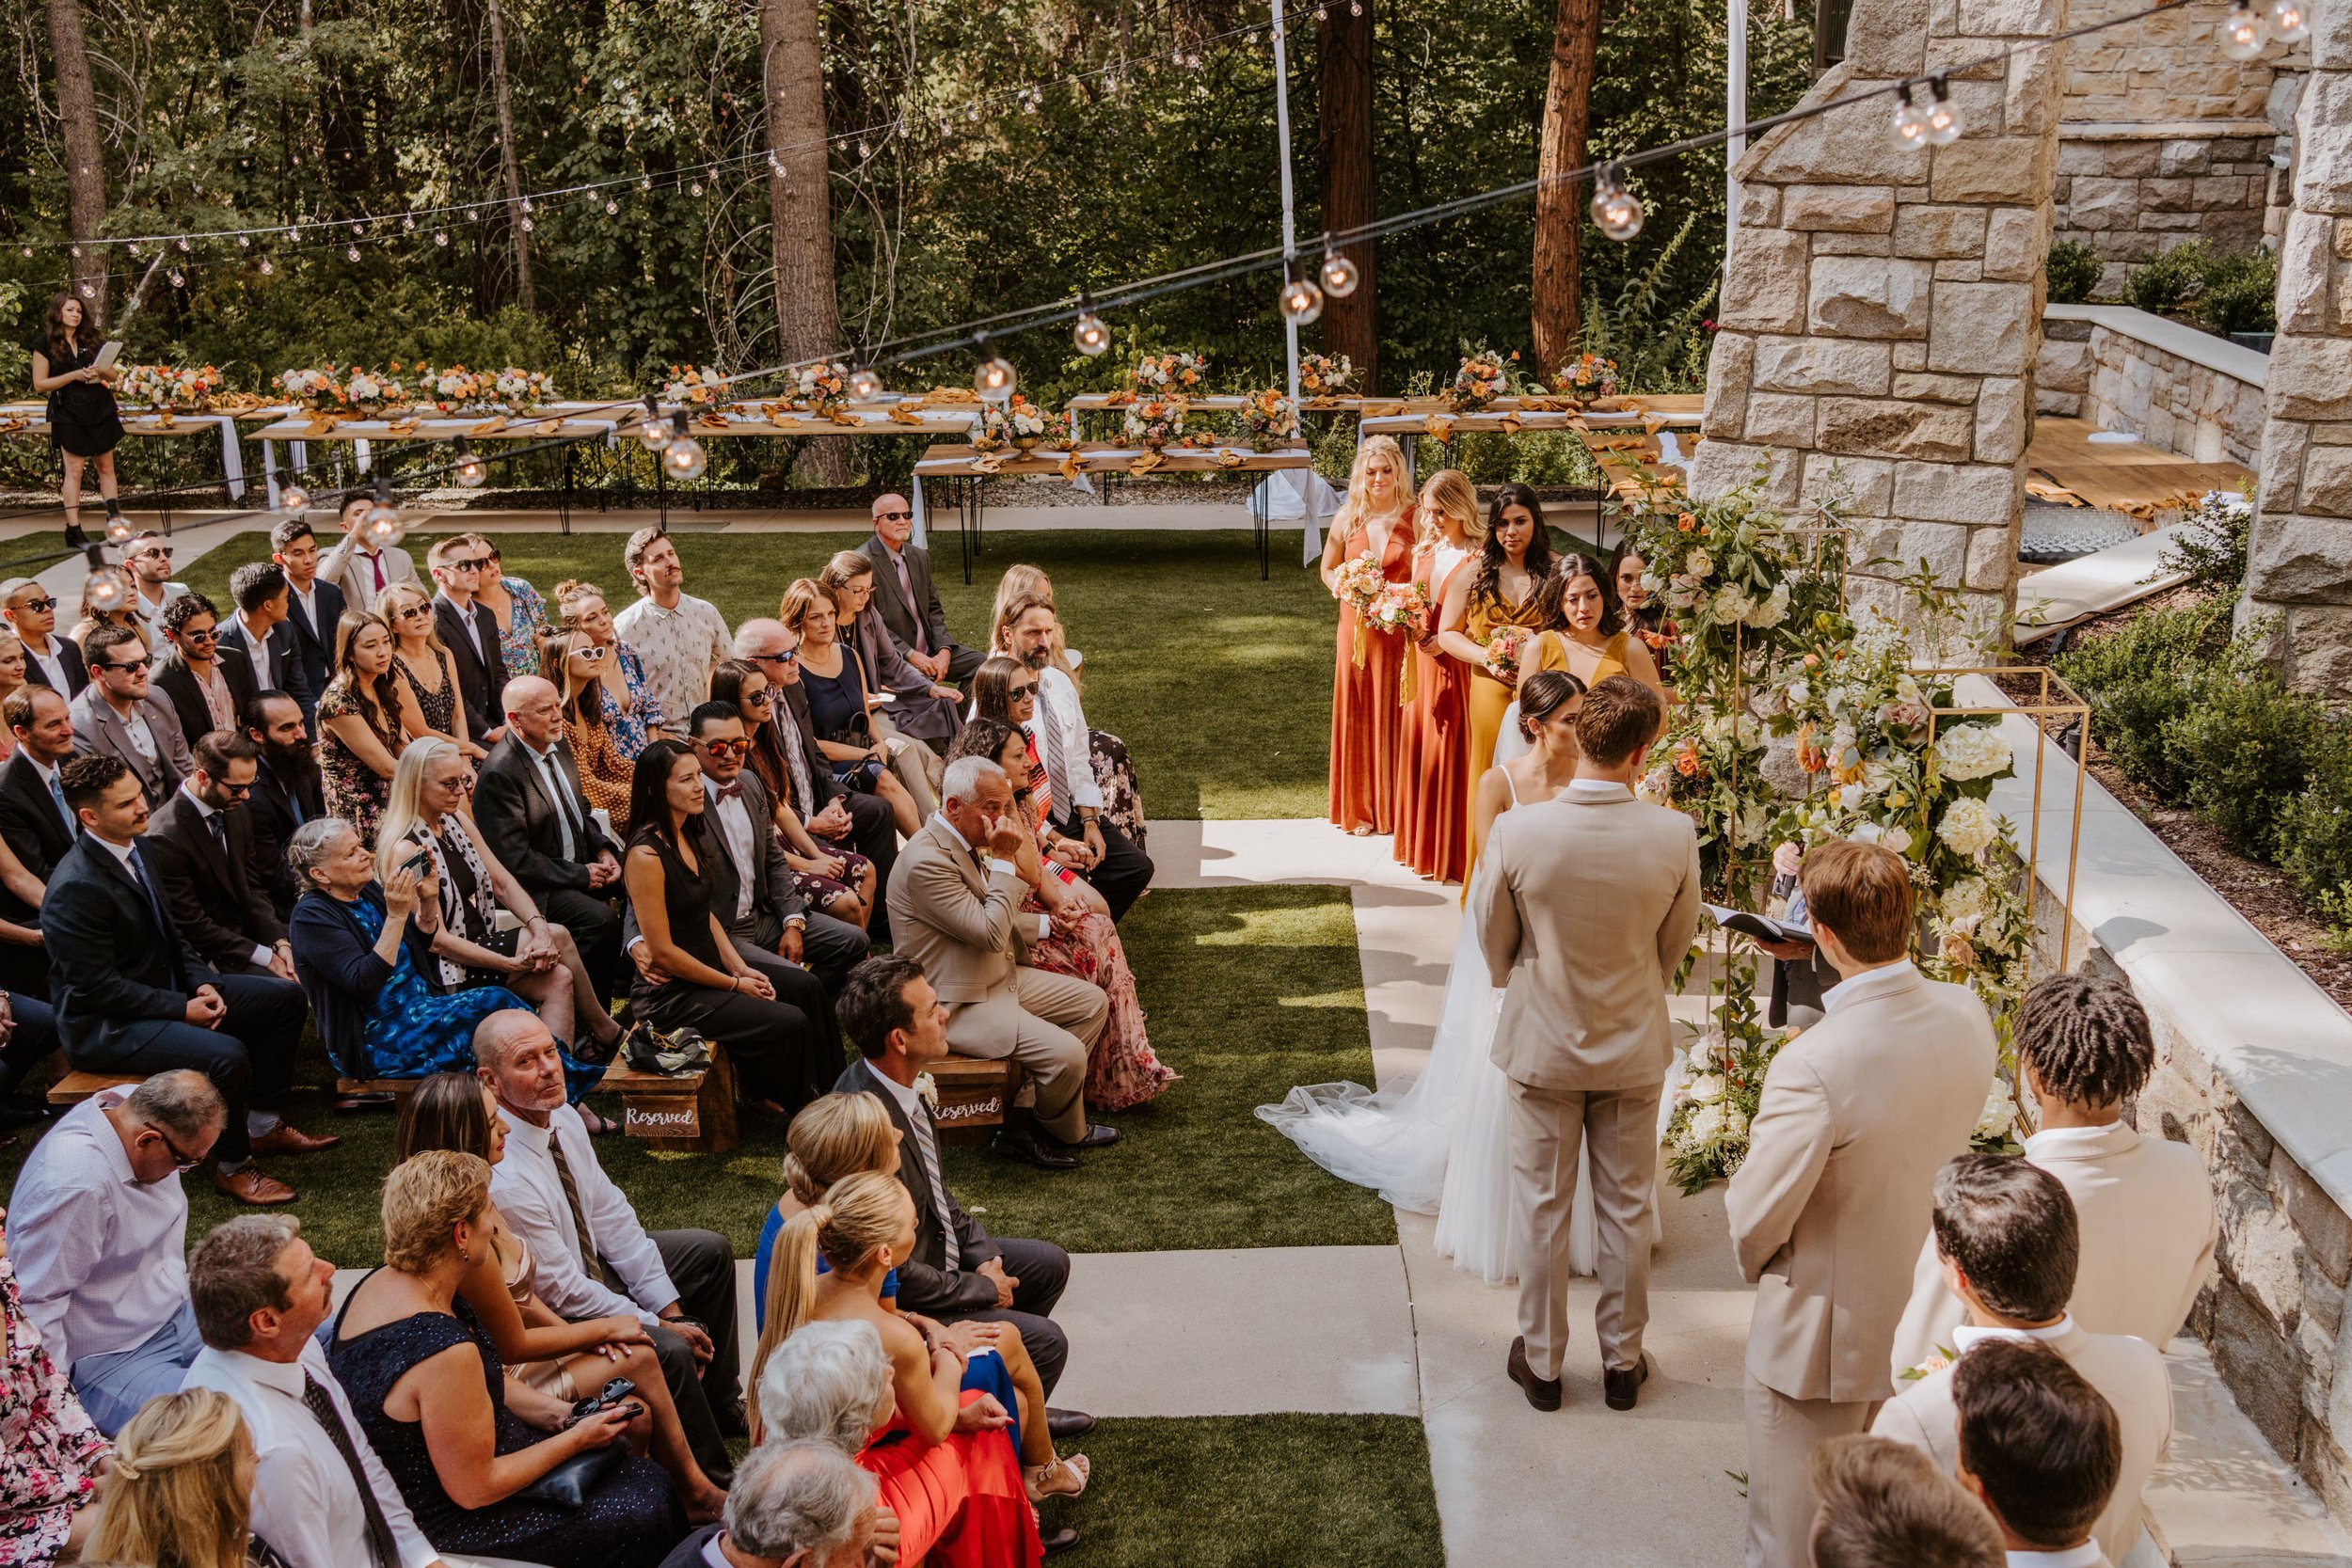 Castle in the Forest Lake Arrowhead Wedding Ceremony,  Photo by Tida Svy